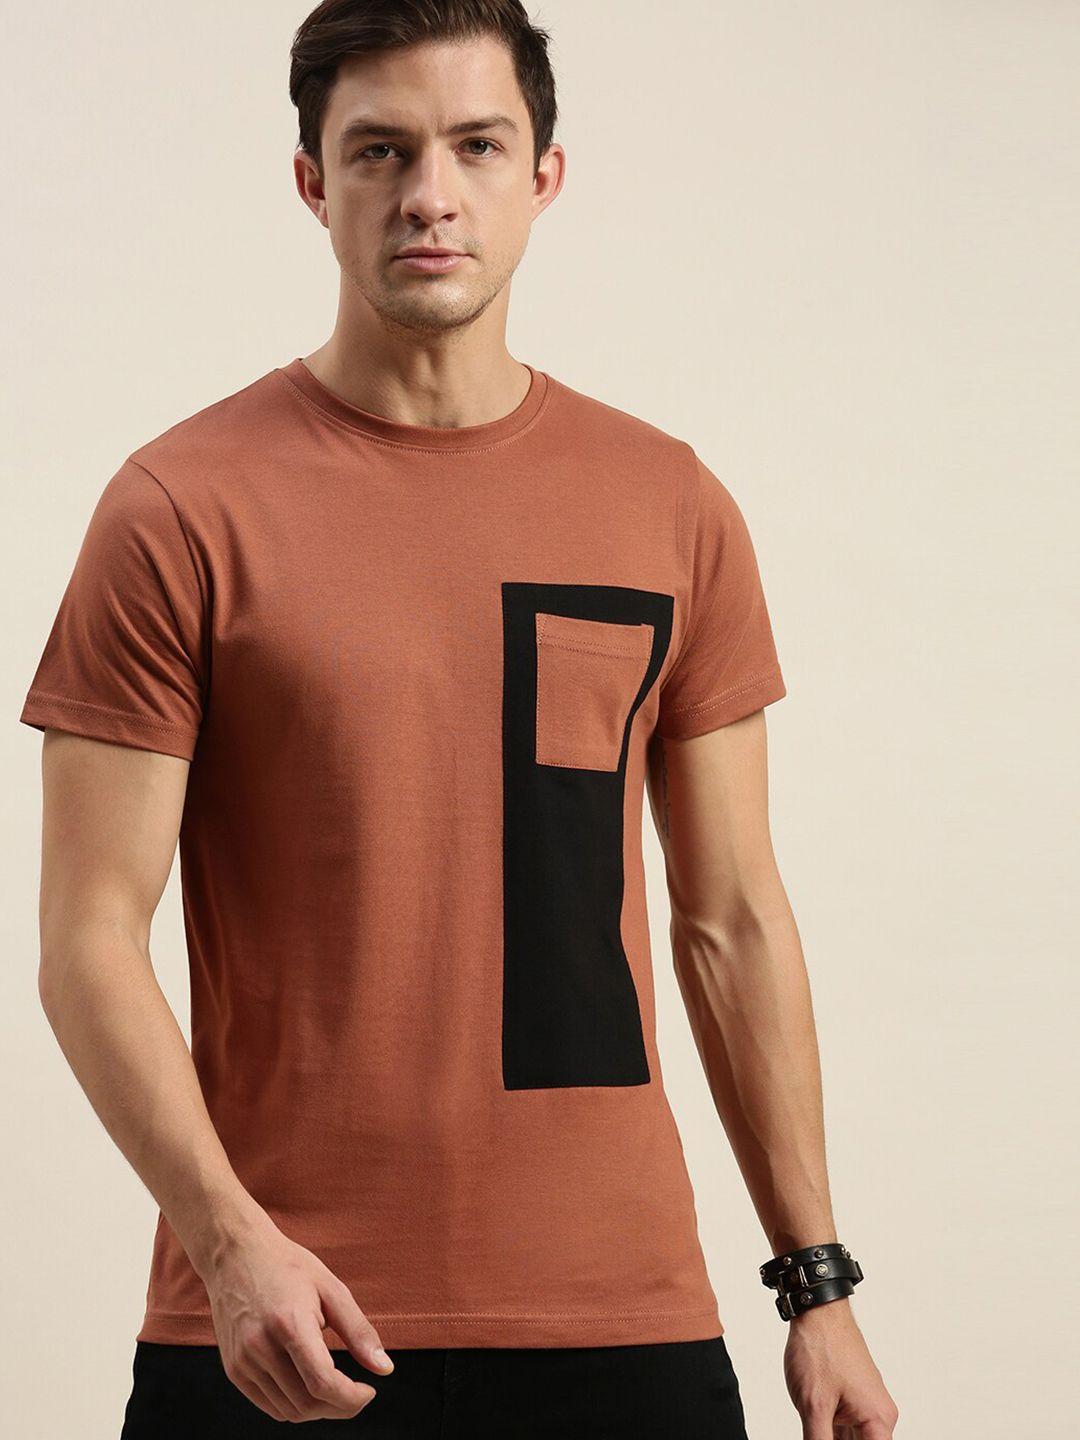 difference of opinion men brown striped v-neck pockets t-shirt